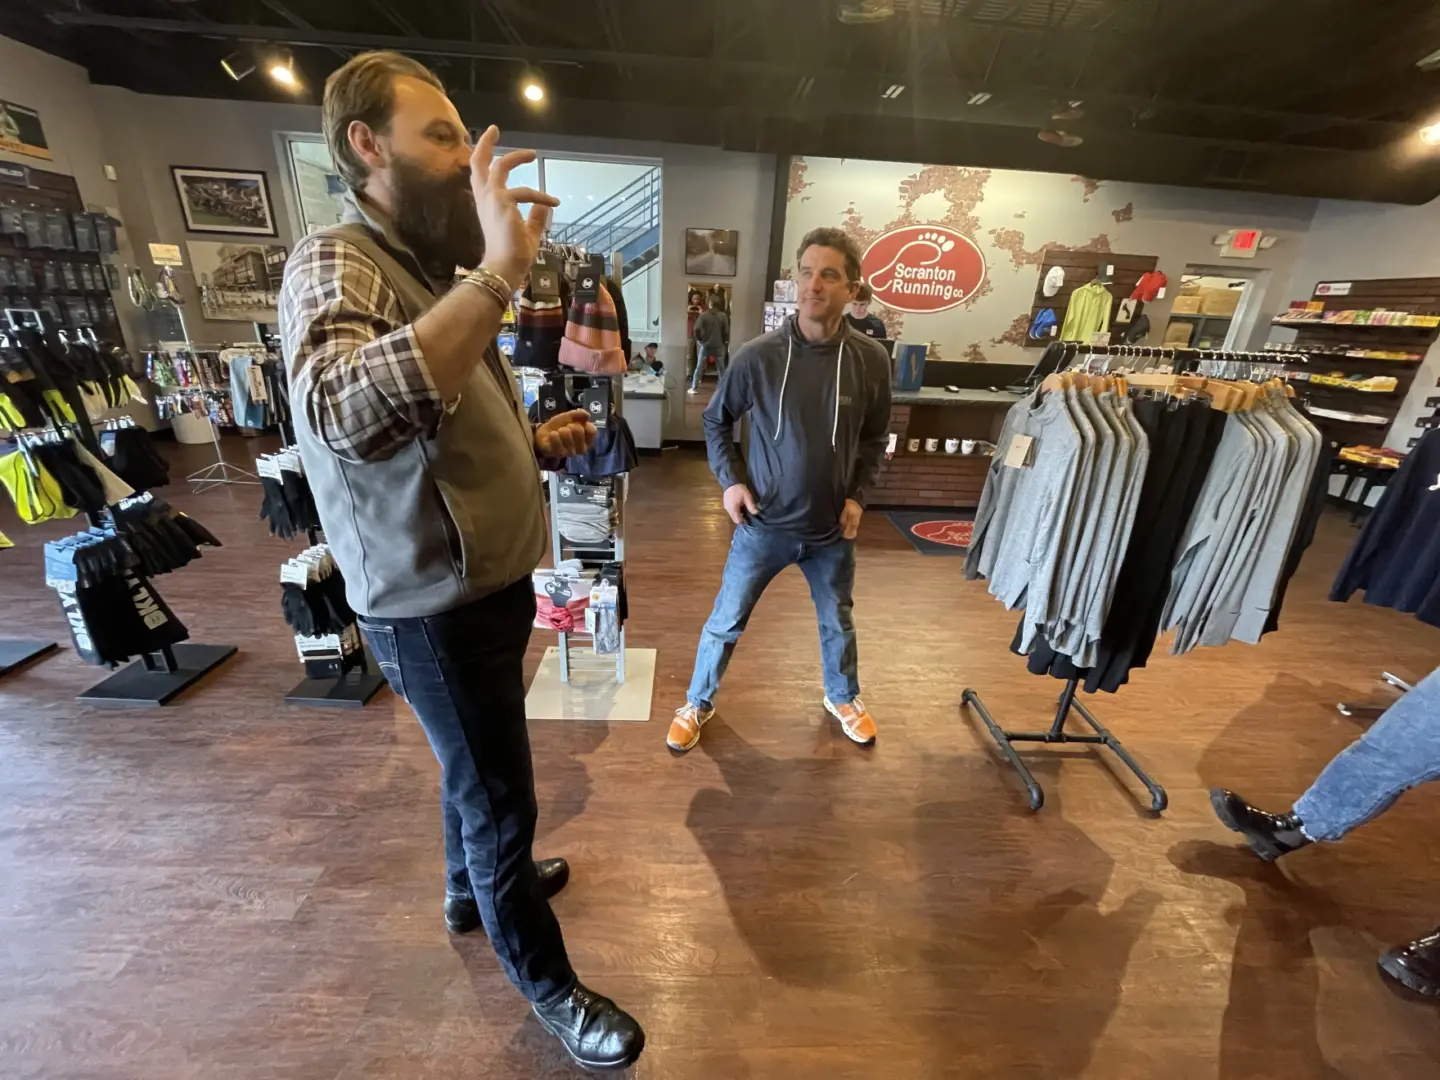 Pennsylvania's Director of Outdoor Recreation Nathan Reigner, Ph.D., left, chats with Matt Bryne, right, owner of the Scranton Running Company during a visit to some of Scranton's outdoor businesses.
